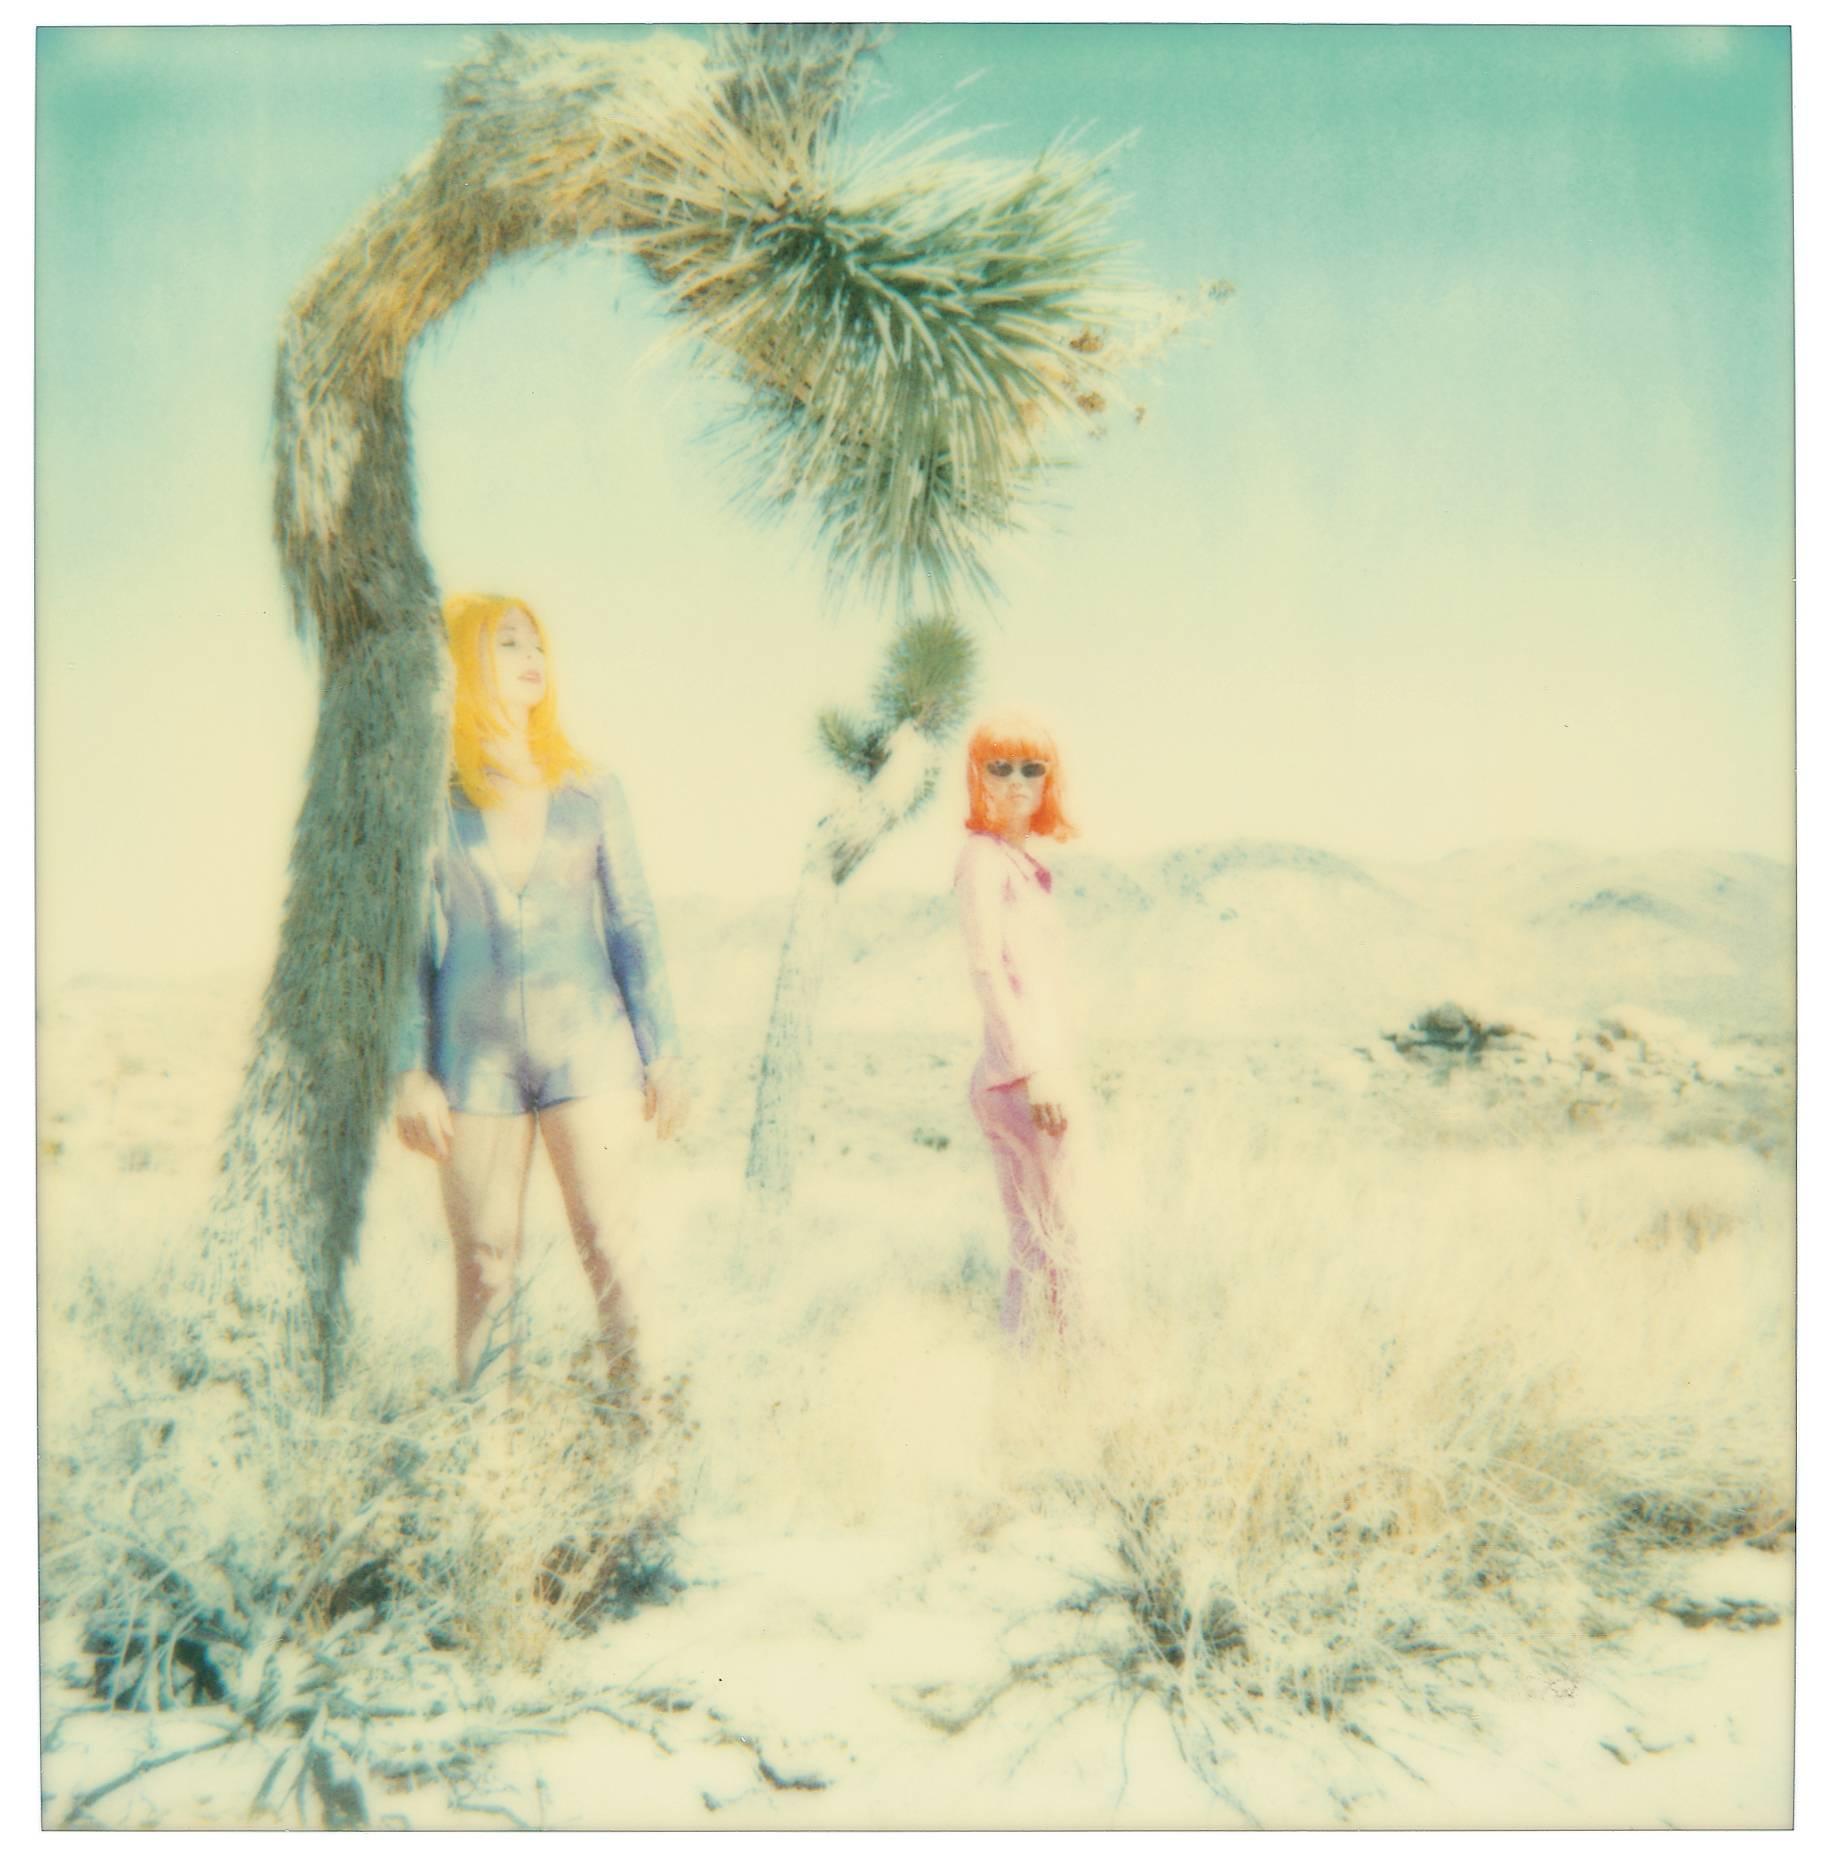 Stefanie Schneider Color Photograph - Long Way Home II with Radha Mitchel and Max Sharam - Last Edition! - Polaroid